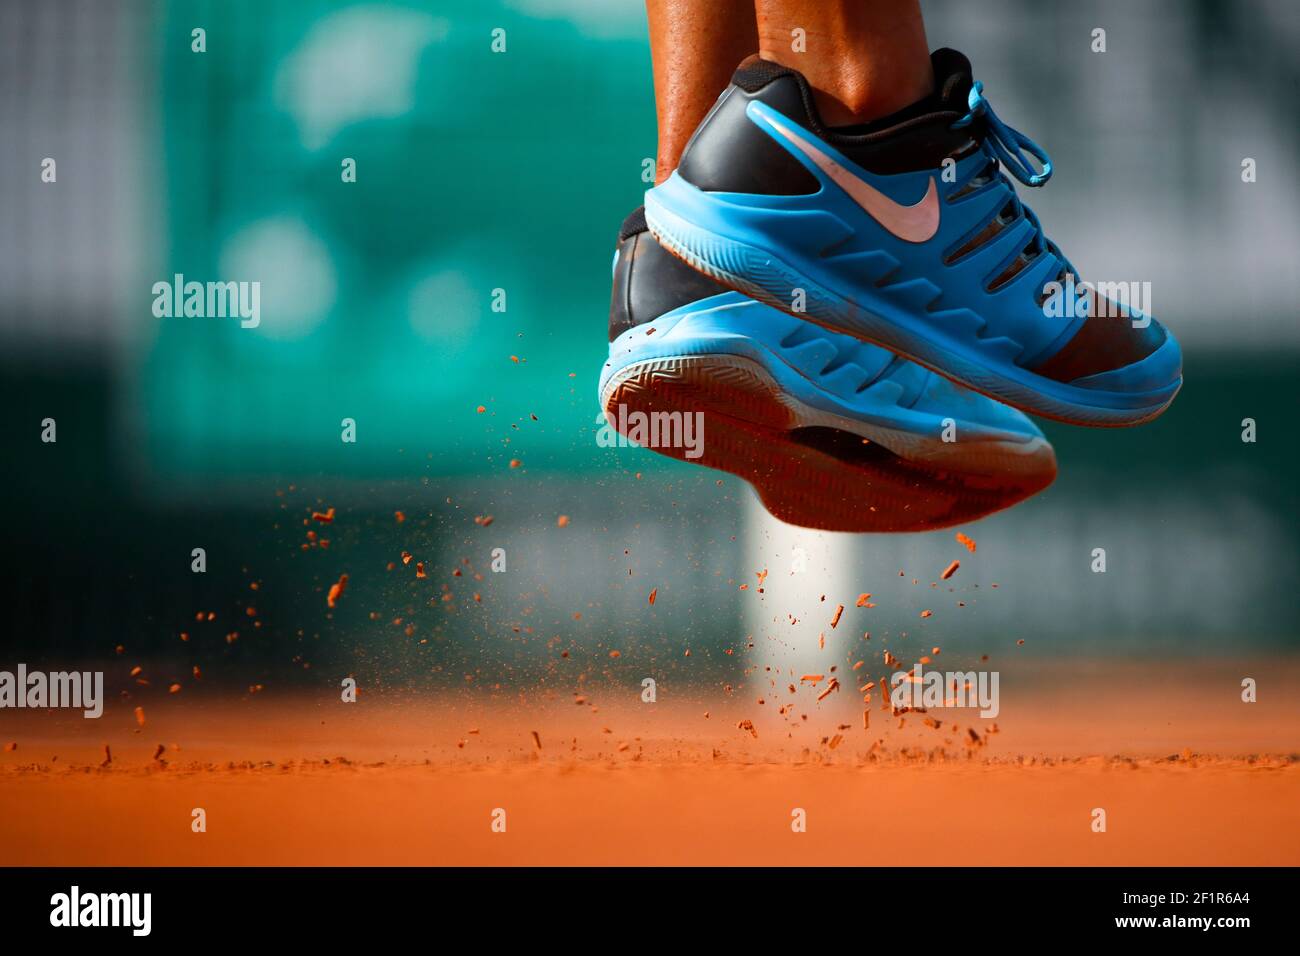 Illustration of Nike shoes and cley of Madison KEYS (USA) at service during  the Roland Garros French Tennis Open 2018, day 12, on June 7, 2018, at the  Roland Garros Stadium in